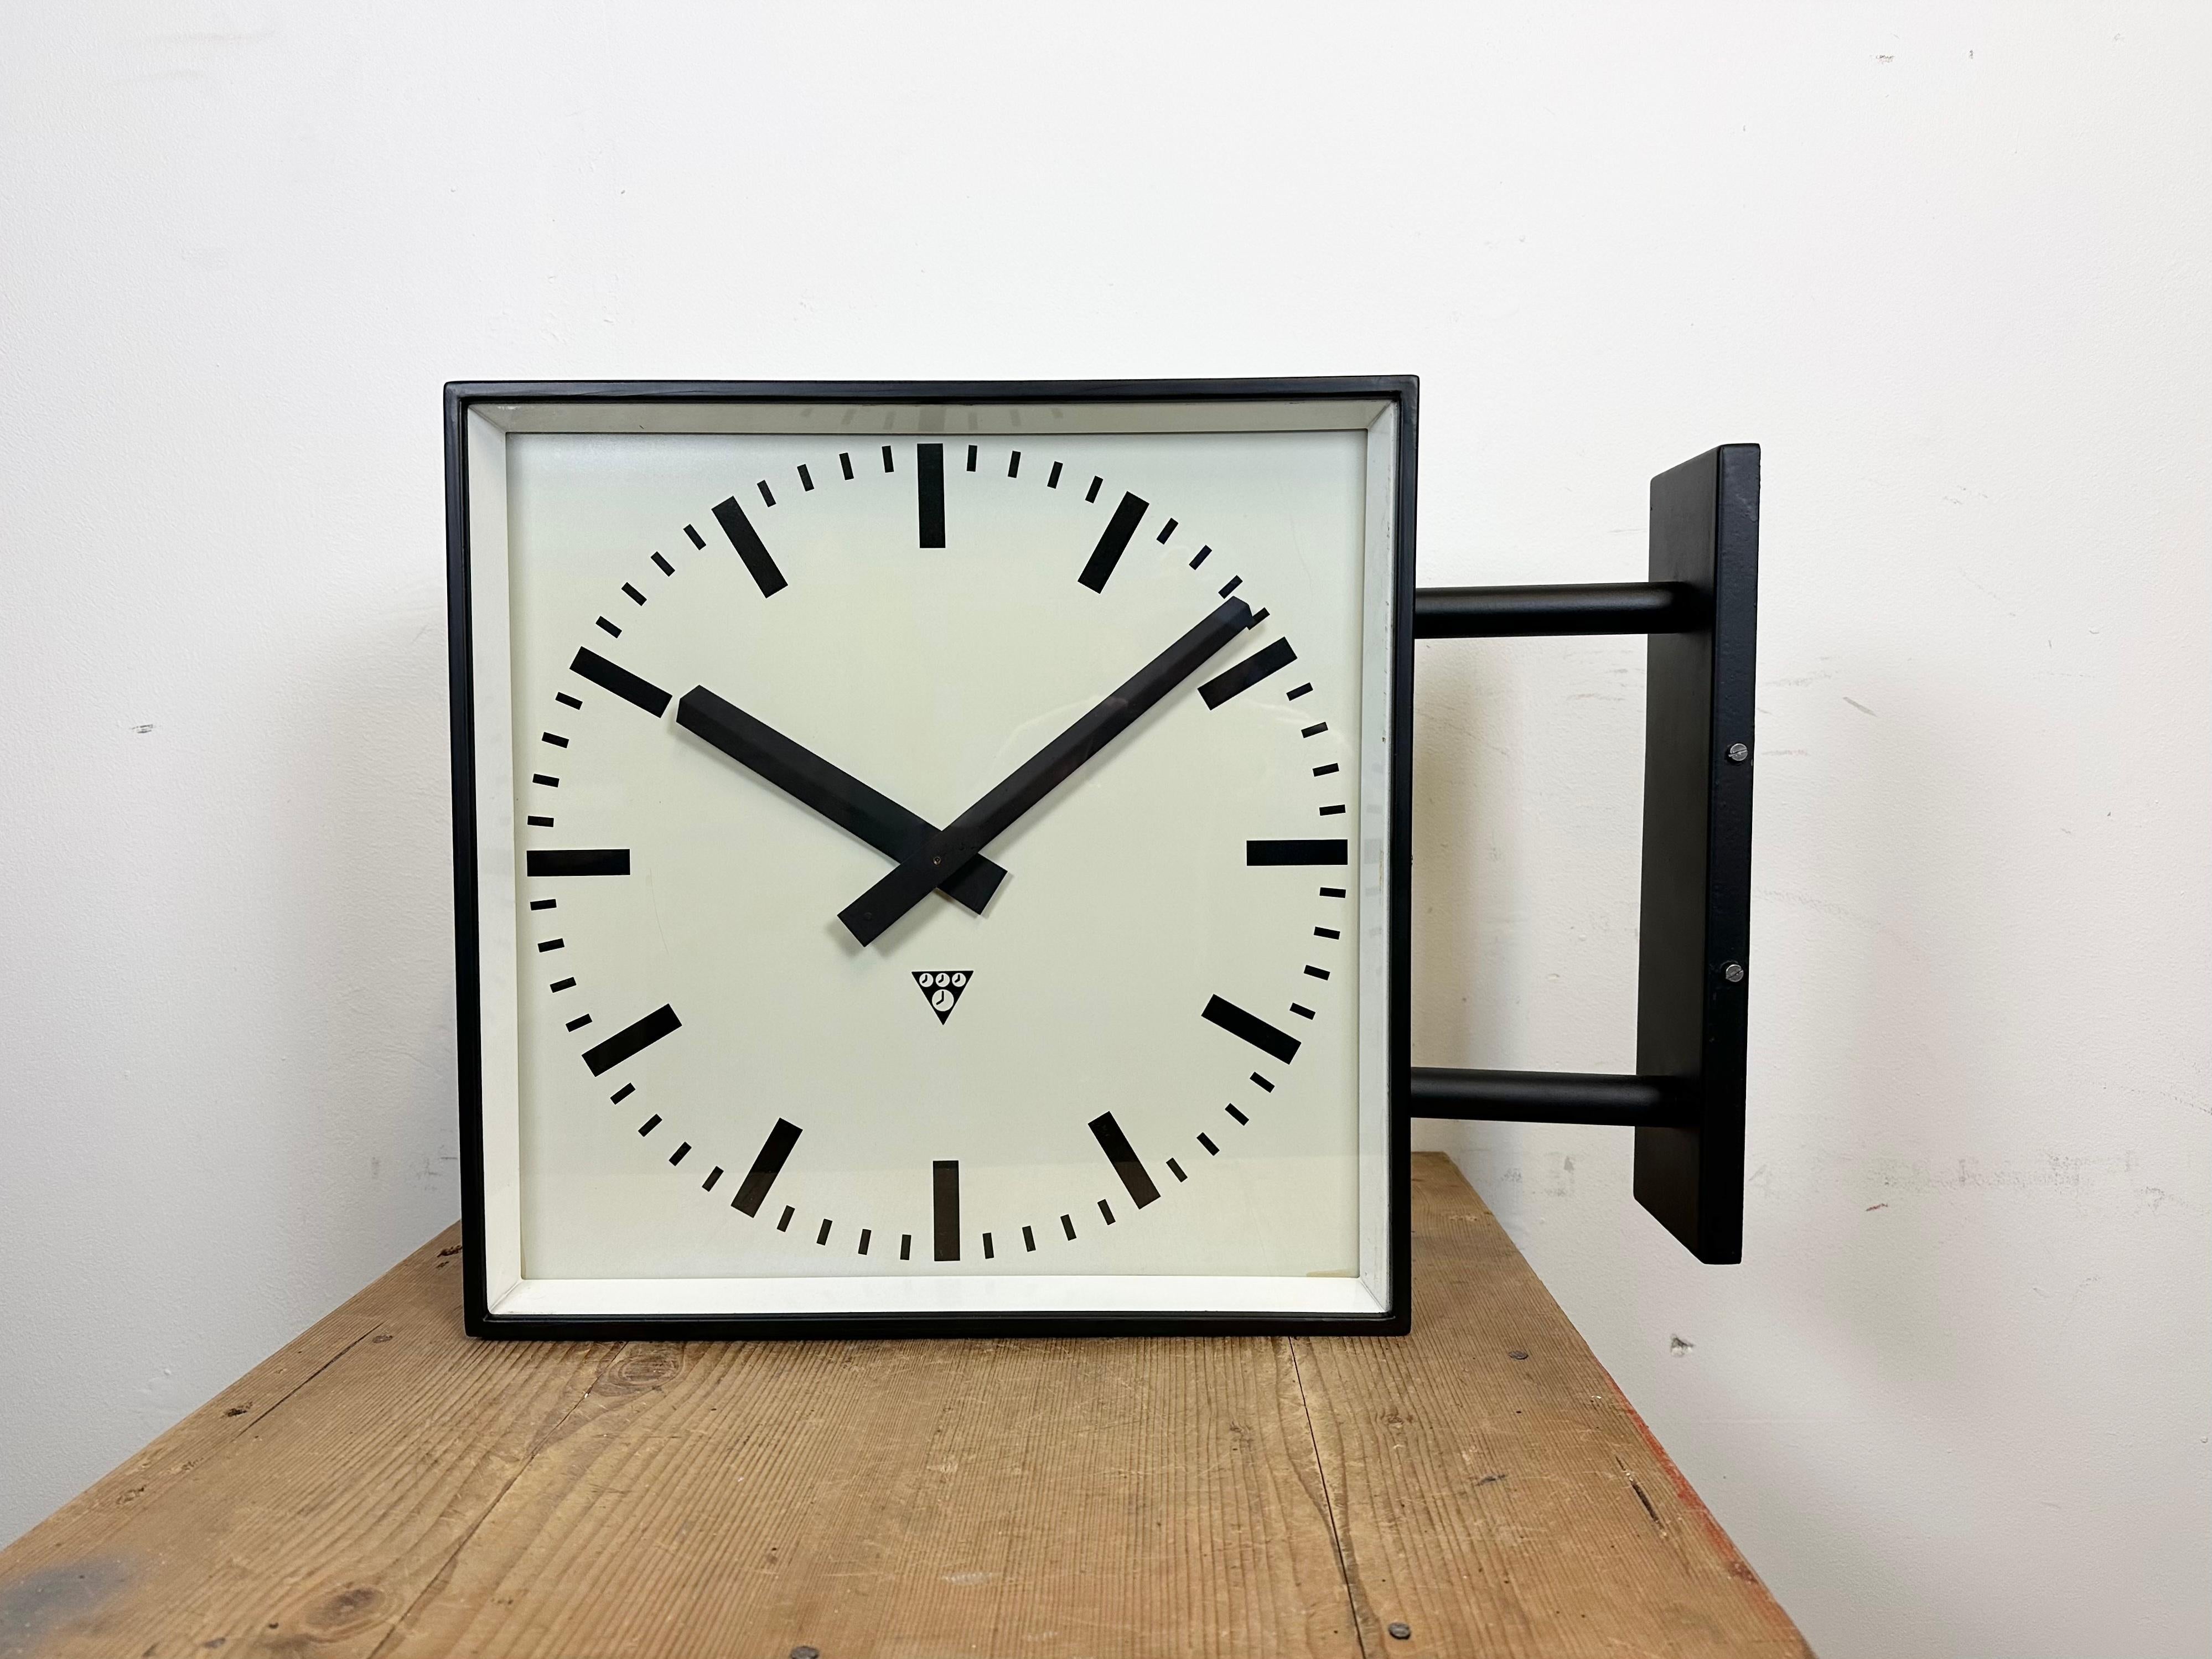 This square double-sided railway, school or factory wall clock was produced by Pragotron, in former Czechoslovakia, during the 1970s. The piece features a black metal body, a clear glass cover, and an aluminum dial and hands. The clock has been